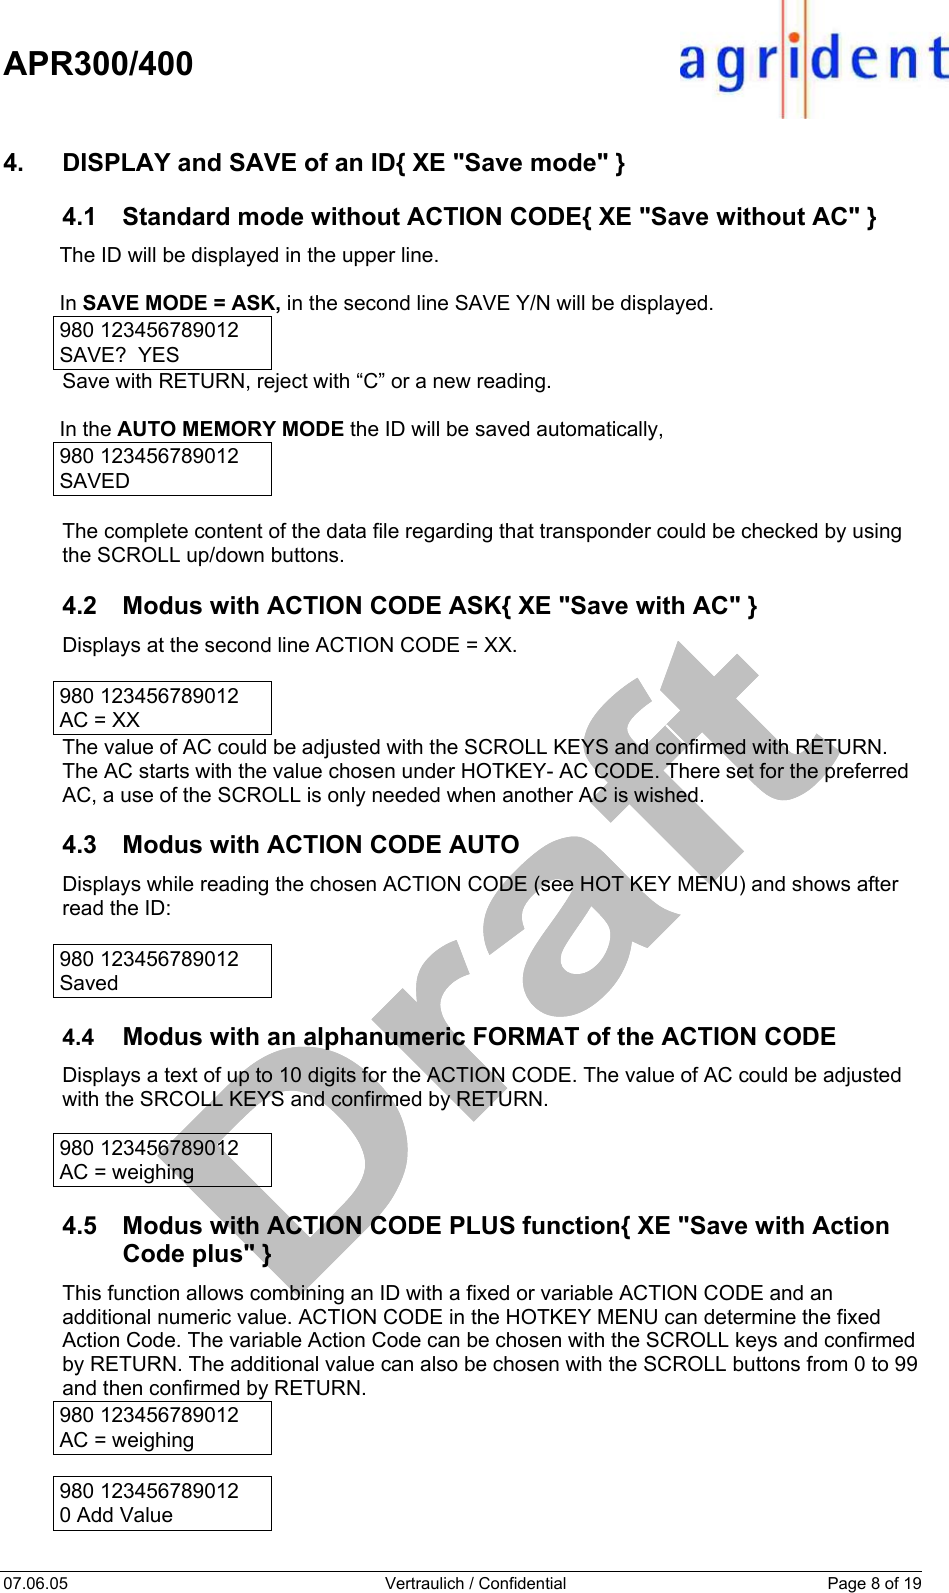    APR300/400  07.06.05  Vertraulich / Confidential  Page 8 of 19  4.  DISPLAY and SAVE of an ID{ XE &quot;Save mode&quot; } 4.1  Standard mode without ACTION CODE{ XE &quot;Save without AC&quot; } The ID will be displayed in the upper line.  In SAVE MODE = ASK, in the second line SAVE Y/N will be displayed. 980 123456789012 SAVE?  YES   Save with RETURN, reject with “C” or a new reading.  In the AUTO MEMORY MODE the ID will be saved automatically,  980 123456789012  SAVED  The complete content of the data file regarding that transponder could be checked by using the SCROLL up/down buttons.  4.2  Modus with ACTION CODE ASK{ XE &quot;Save with AC&quot; } Displays at the second line ACTION CODE = XX.  980 123456789012 AC = XX The value of AC could be adjusted with the SCROLL KEYS and confirmed with RETURN. The AC starts with the value chosen under HOTKEY- AC CODE. There set for the preferred AC, a use of the SCROLL is only needed when another AC is wished.  4.3  Modus with ACTION CODE AUTO Displays while reading the chosen ACTION CODE (see HOT KEY MENU) and shows after read the ID:  980 123456789012 Saved  4.4  Modus with an alphanumeric FORMAT of the ACTION CODE Displays a text of up to 10 digits for the ACTION CODE. The value of AC could be adjusted with the SRCOLL KEYS and confirmed by RETURN.  980 123456789012 AC = weighing  4.5  Modus with ACTION CODE PLUS function{ XE &quot;Save with Action Code plus&quot; } This function allows combining an ID with a fixed or variable ACTION CODE and an additional numeric value. ACTION CODE in the HOTKEY MENU can determine the fixed Action Code. The variable Action Code can be chosen with the SCROLL keys and confirmed by RETURN. The additional value can also be chosen with the SCROLL buttons from 0 to 99 and then confirmed by RETURN. 980 123456789012 AC = weighing  980 123456789012 0 Add Value  